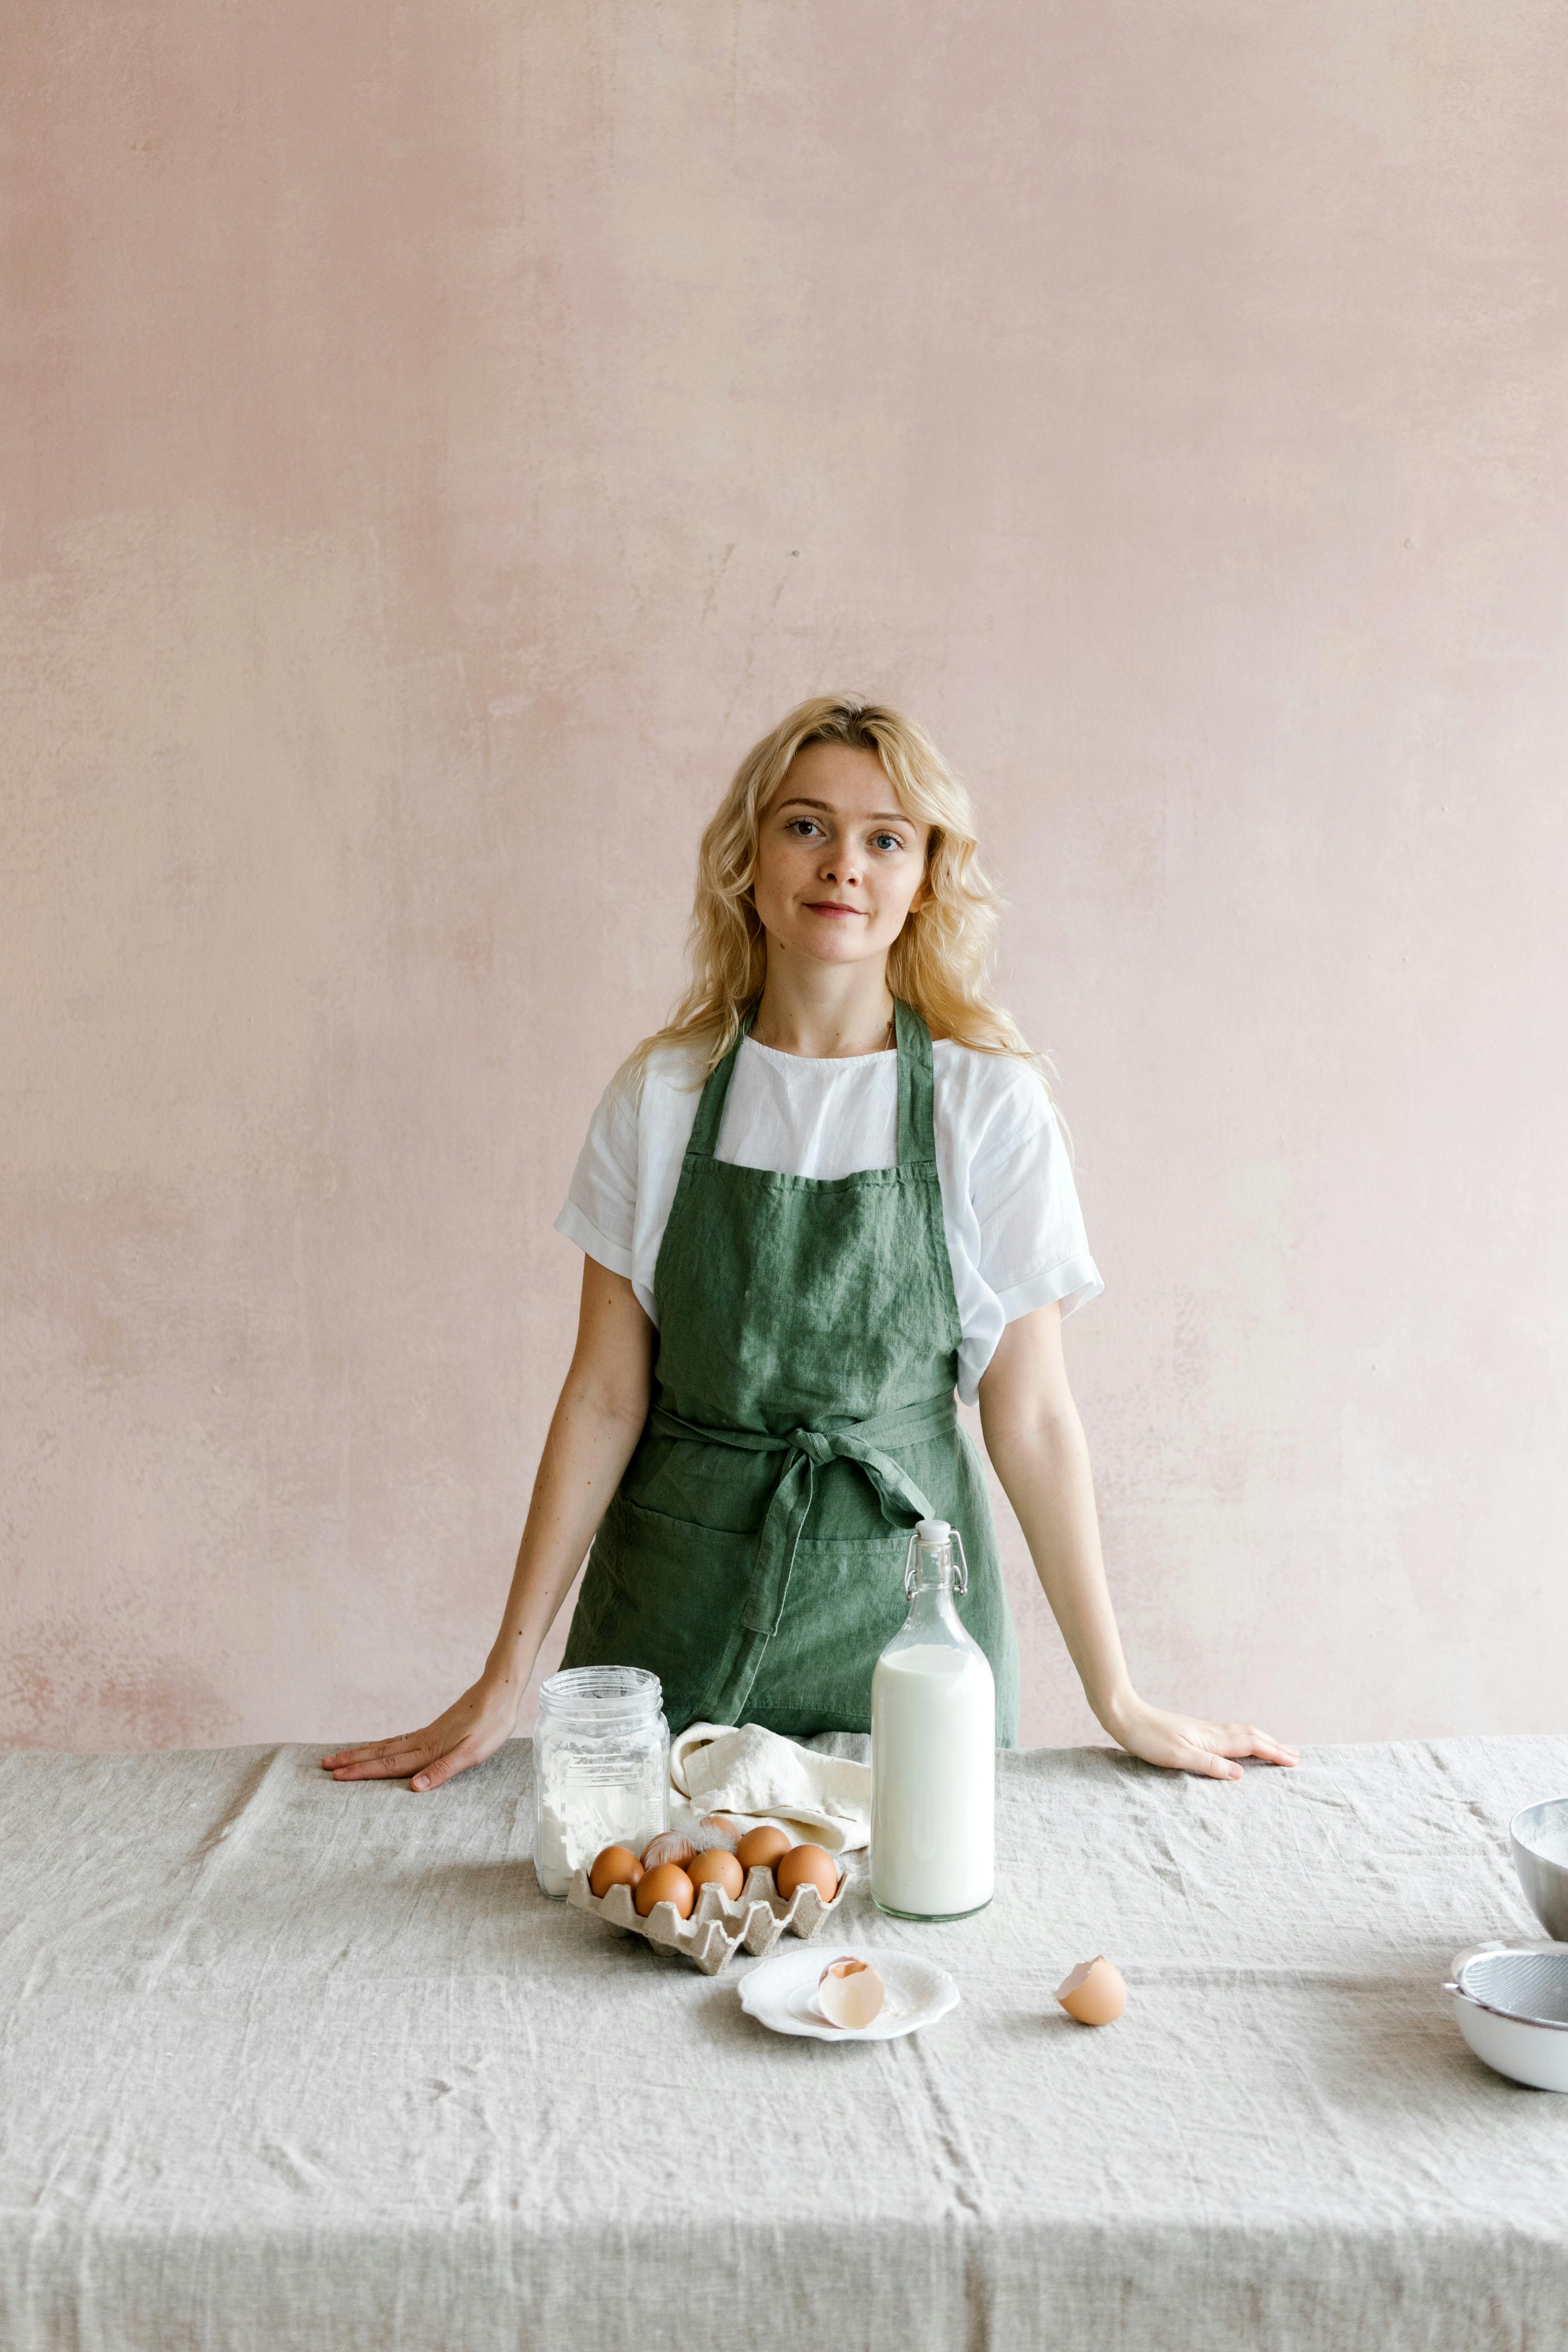 Woman in apron standing at table while cooking in light room | Source: Pexels